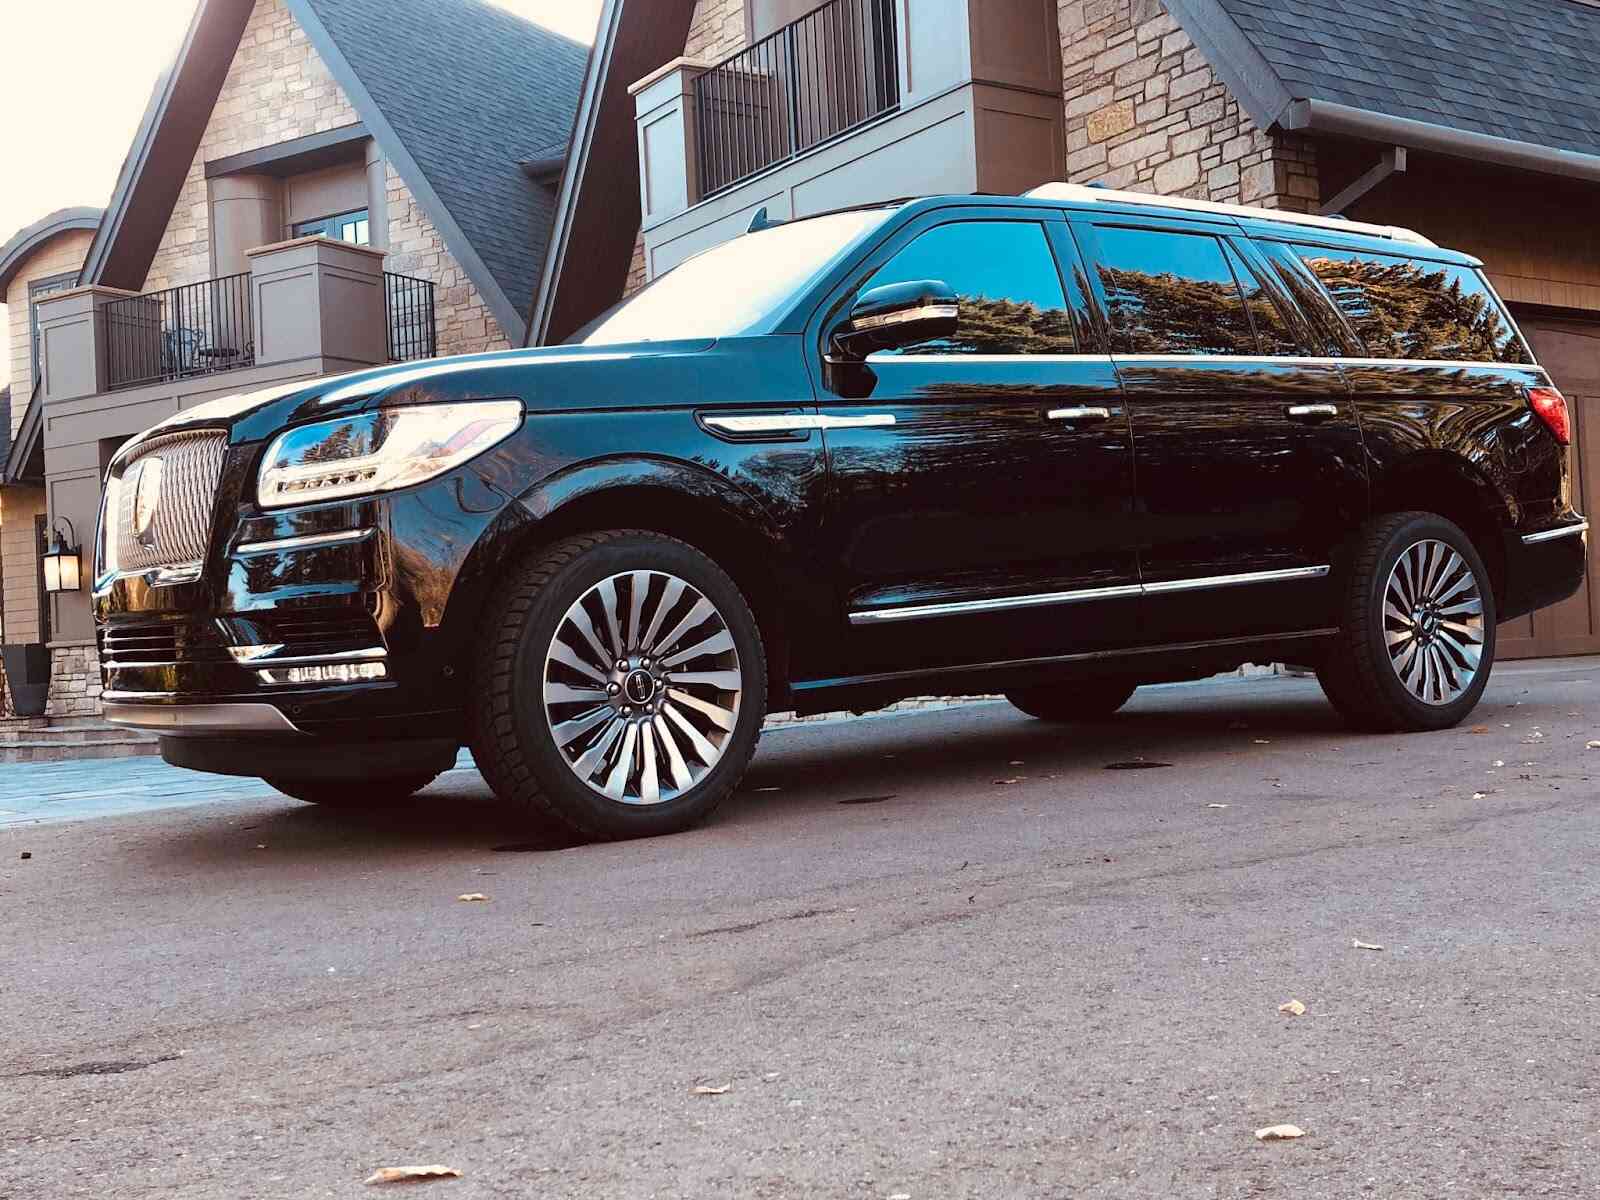 Why You Should Hire a Luxury Chauffeur Service in Calgary